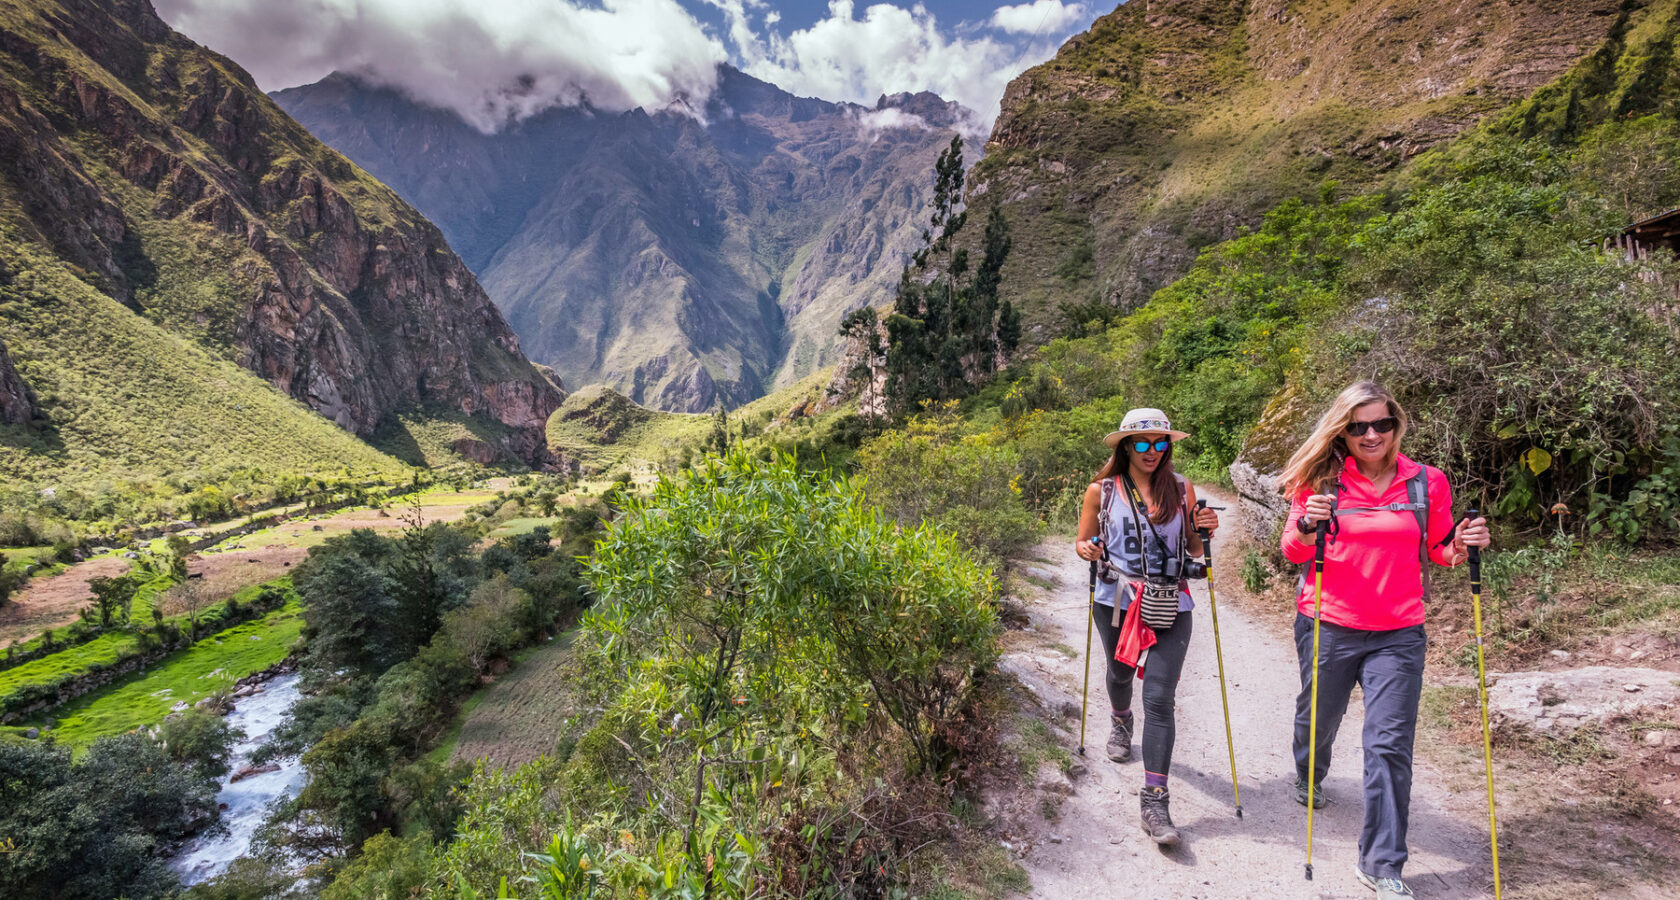 Hikers along the Inca Trail in Peru, one of the bucket list hikes around the world